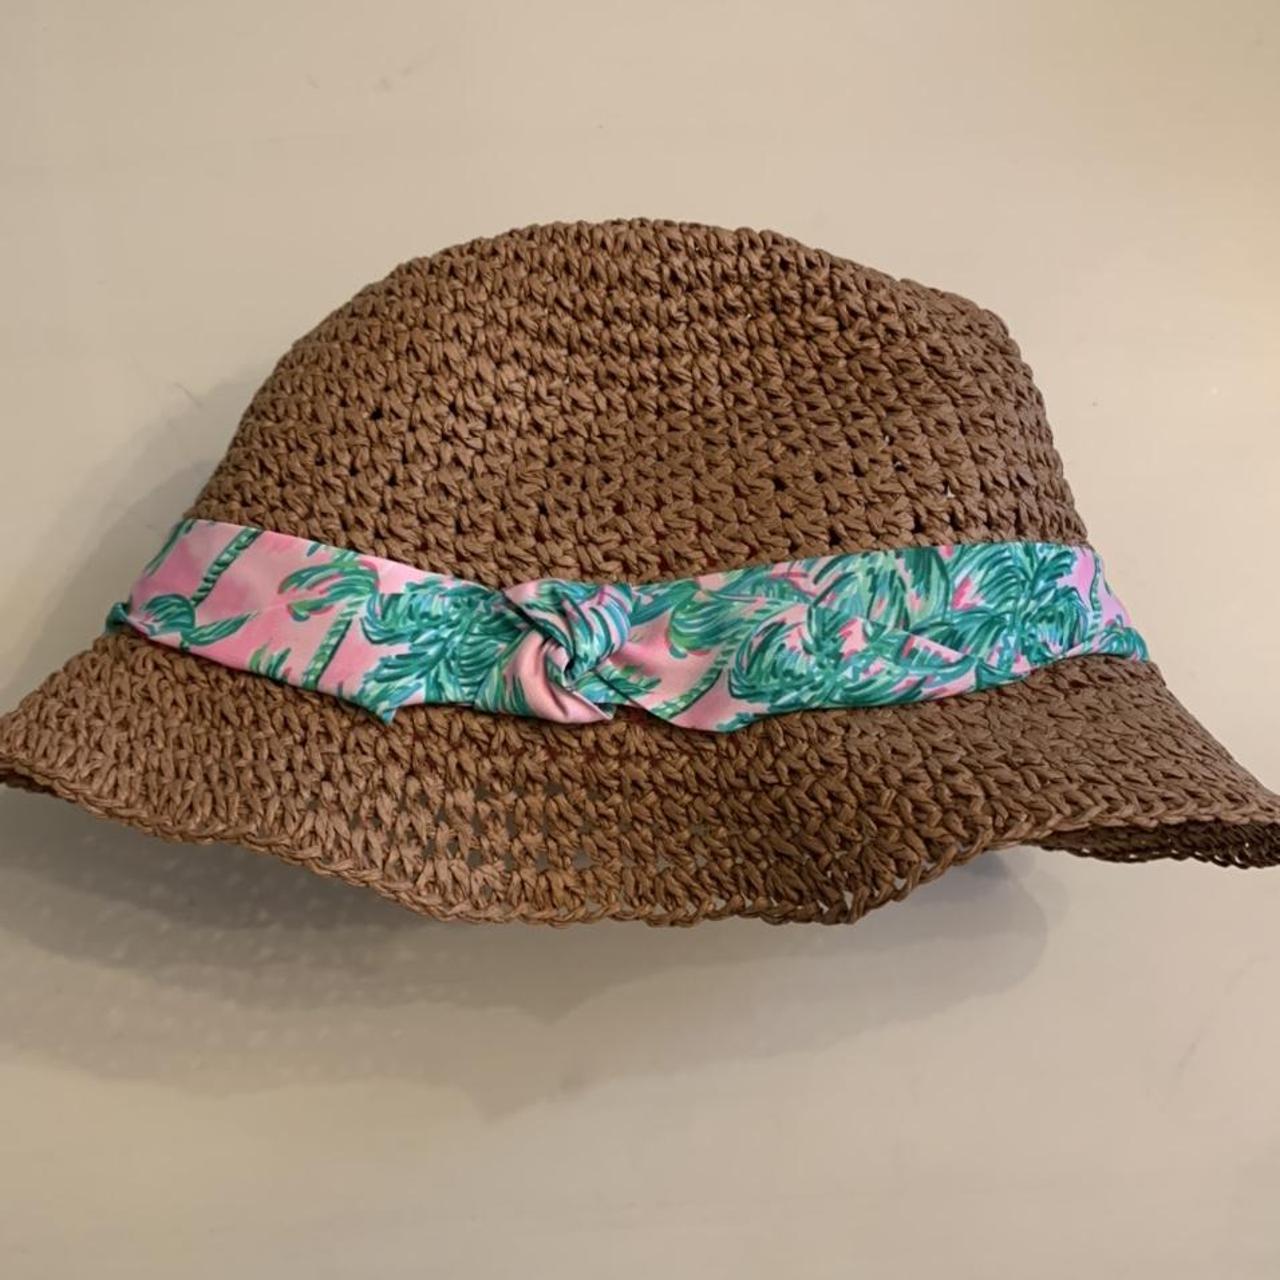 Lilly Pulitzer Women's Tan and Pink Hat